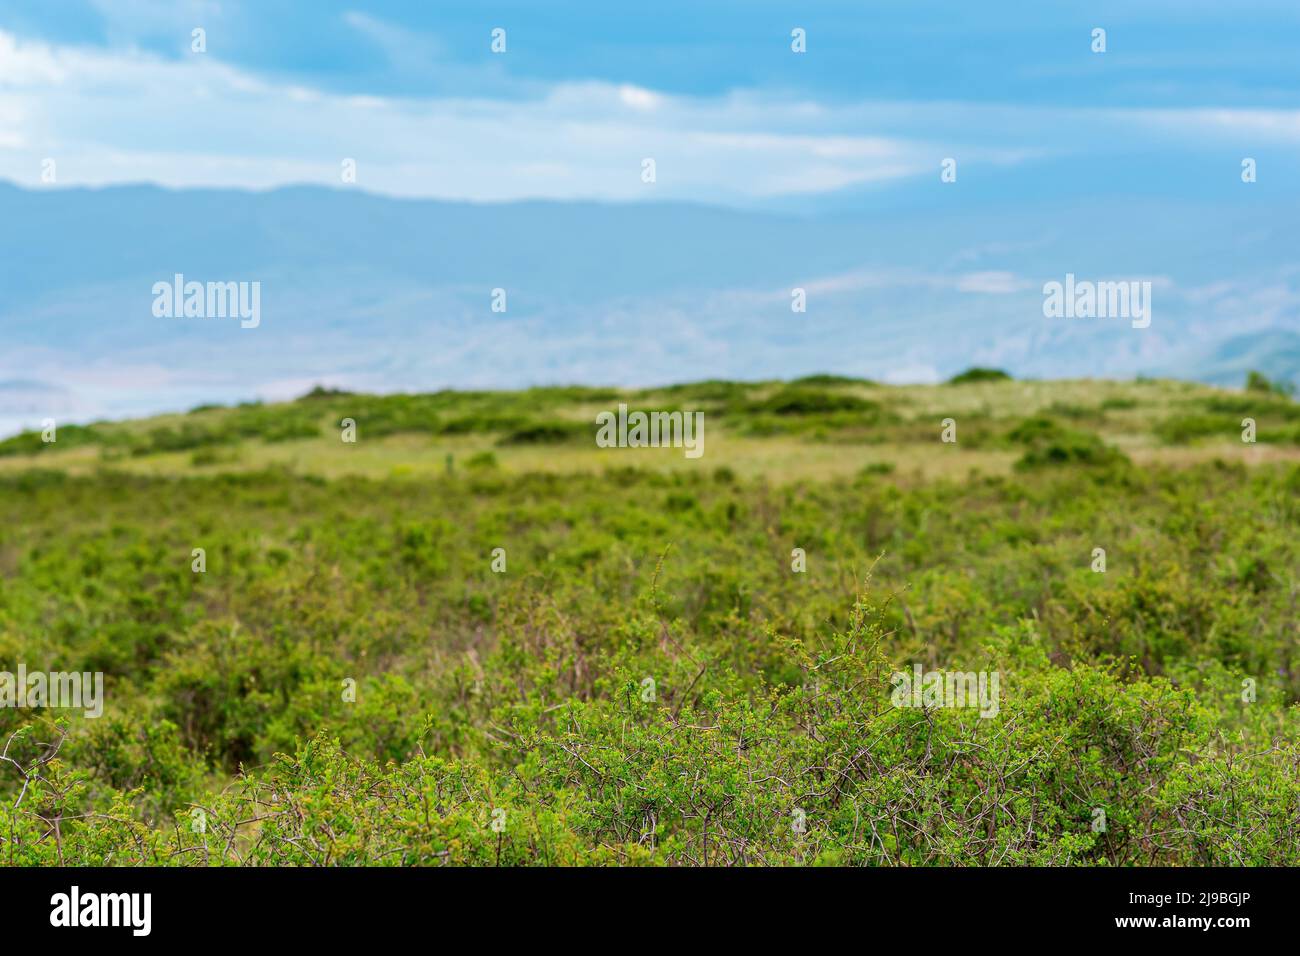 partially blurred landscape with spring mountain shrubland, focus on nearby vegetation Stock Photo